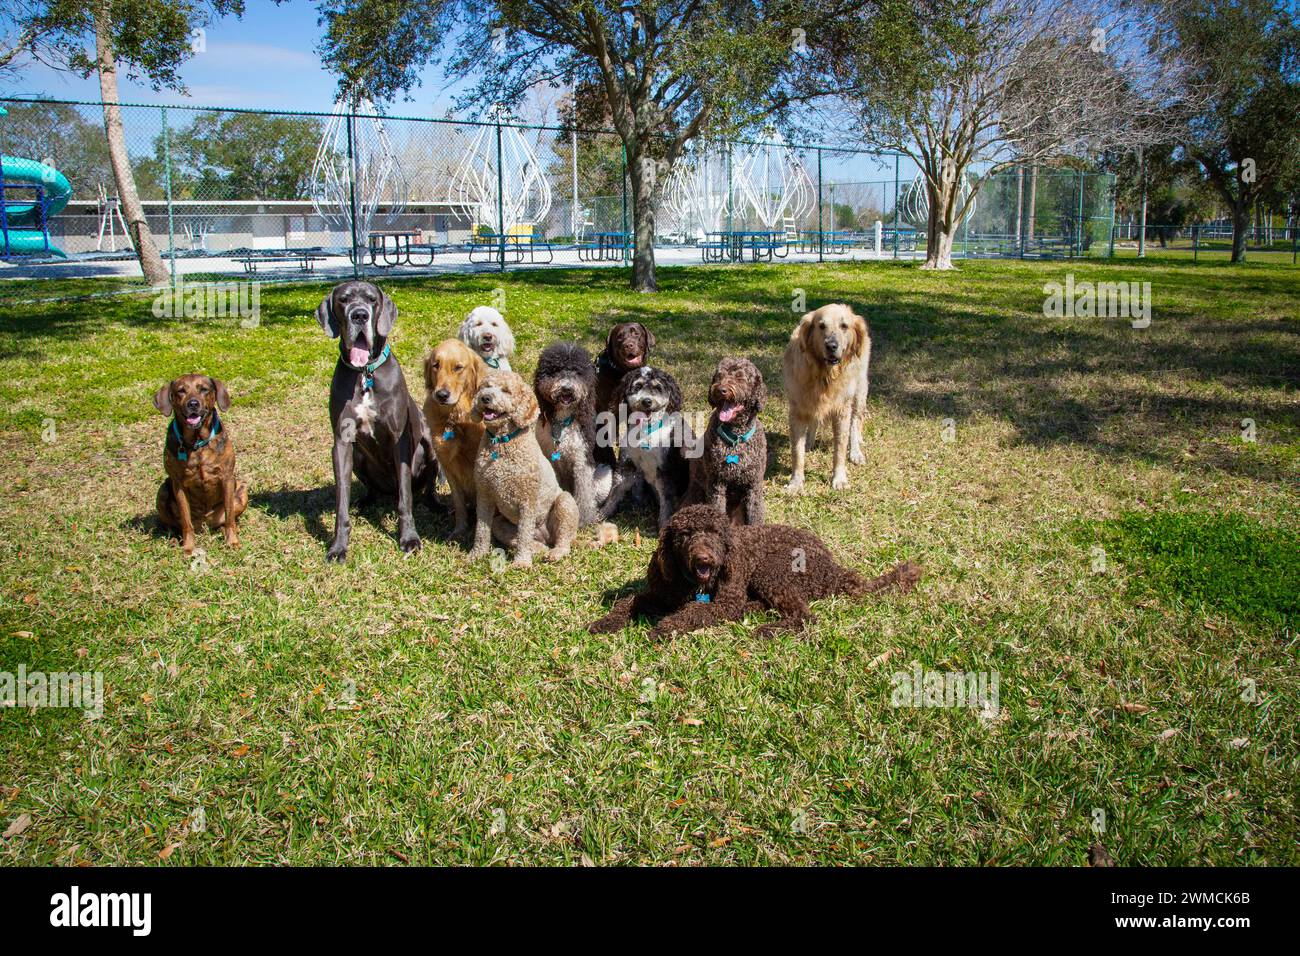 Large group of assorted dogs sitting together in a dog park, Florida, USA Stock Photo